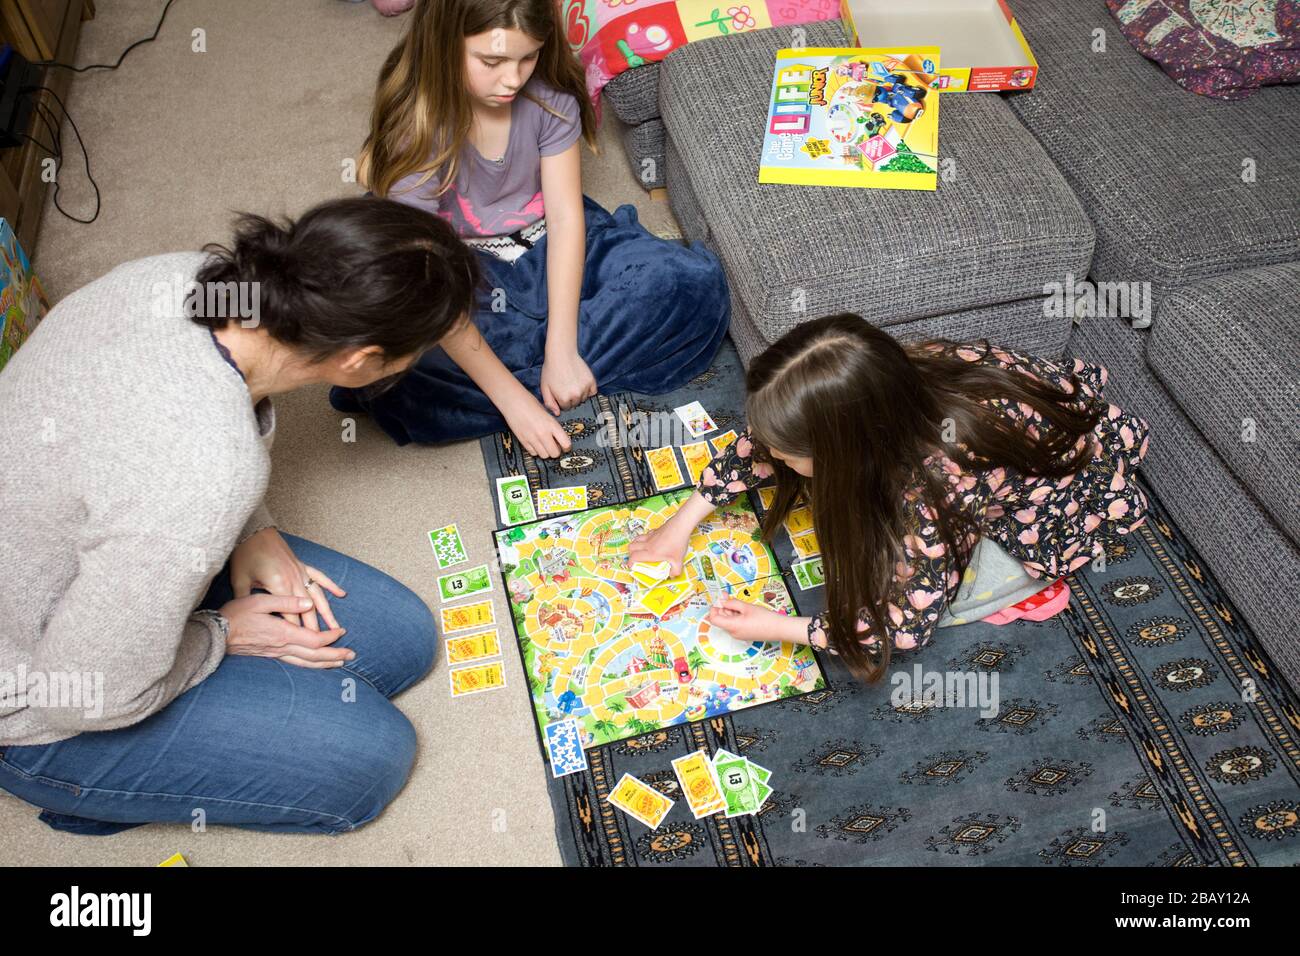 Family playing Game Of Life on the living room floor, England Stock Photo